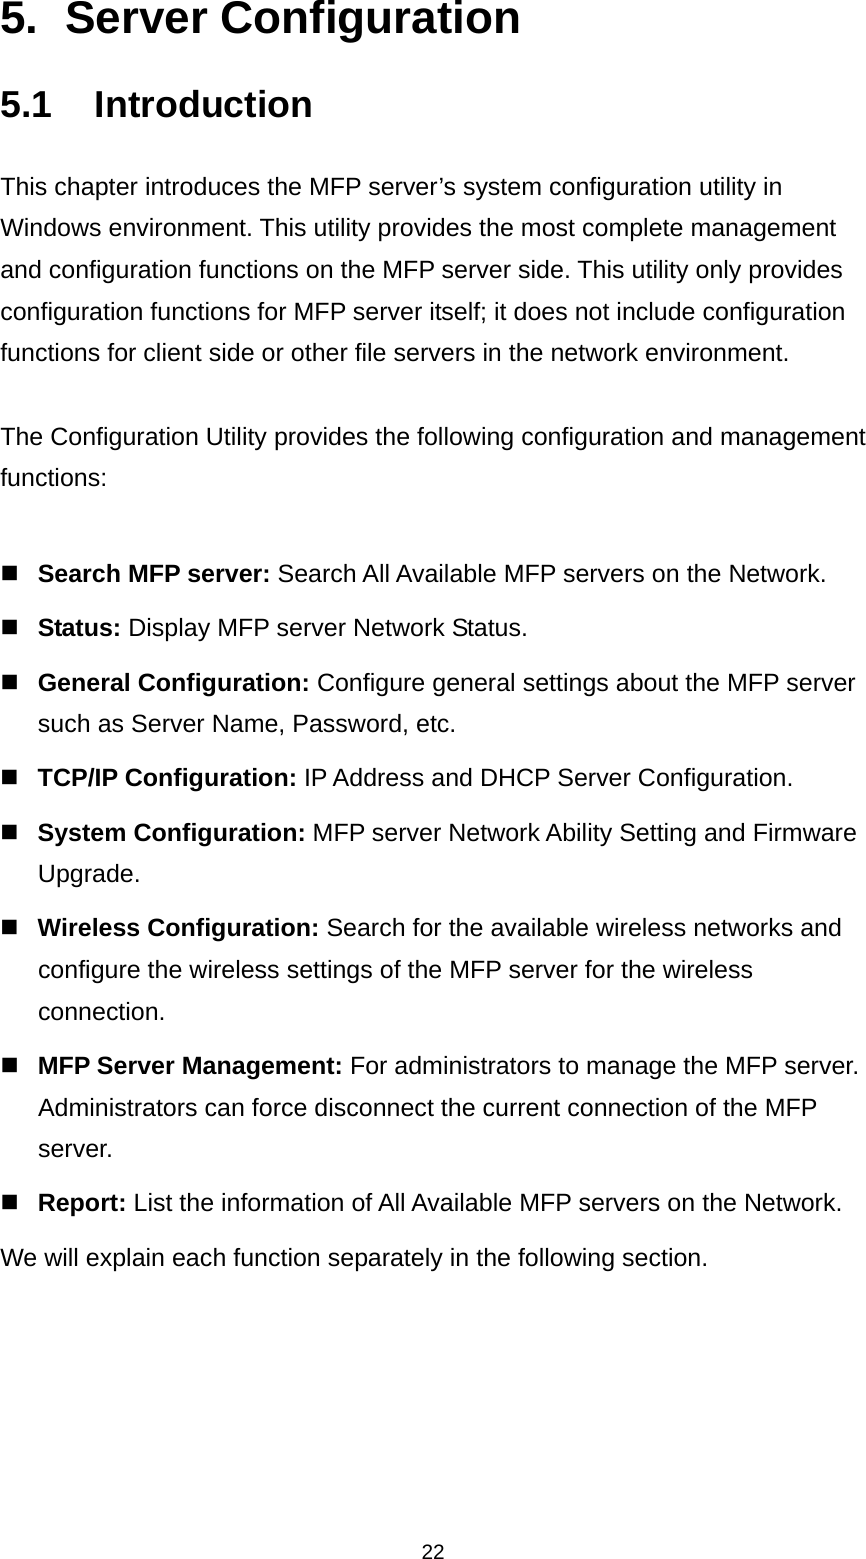 22 5. Server Configuration 5.1 Introduction This chapter introduces the MFP server’s system configuration utility in Windows environment. This utility provides the most complete management and configuration functions on the MFP server side. This utility only provides configuration functions for MFP server itself; it does not include configuration functions for client side or other file servers in the network environment.  The Configuration Utility provides the following configuration and management functions:   Search MFP server: Search All Available MFP servers on the Network.  Status: Display MFP server Network Status.  General Configuration: Configure general settings about the MFP server such as Server Name, Password, etc.  TCP/IP Configuration: IP Address and DHCP Server Configuration.  System Configuration: MFP server Network Ability Setting and Firmware Upgrade.  Wireless Configuration: Search for the available wireless networks and configure the wireless settings of the MFP server for the wireless connection.  MFP Server Management: For administrators to manage the MFP server. Administrators can force disconnect the current connection of the MFP server.  Report: List the information of All Available MFP servers on the Network. We will explain each function separately in the following section.  